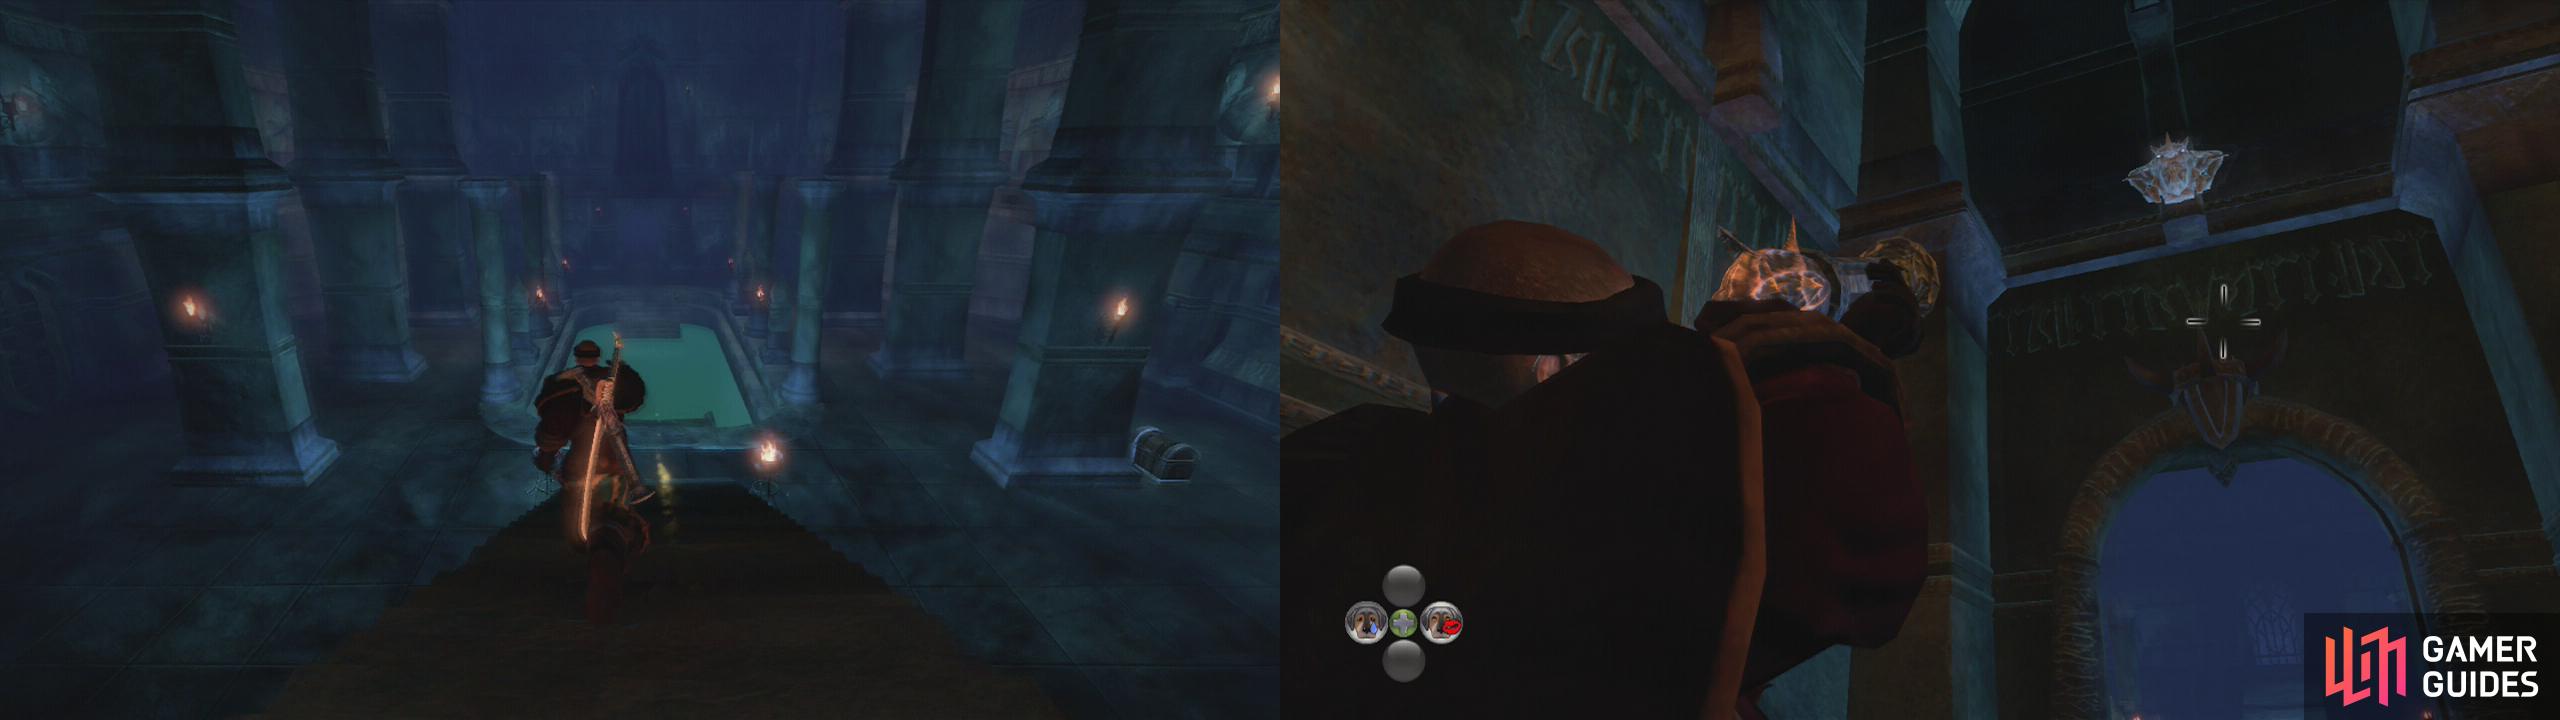 After the pool room (left) enter the next hallway and then turn around to see a gargoyle (right).